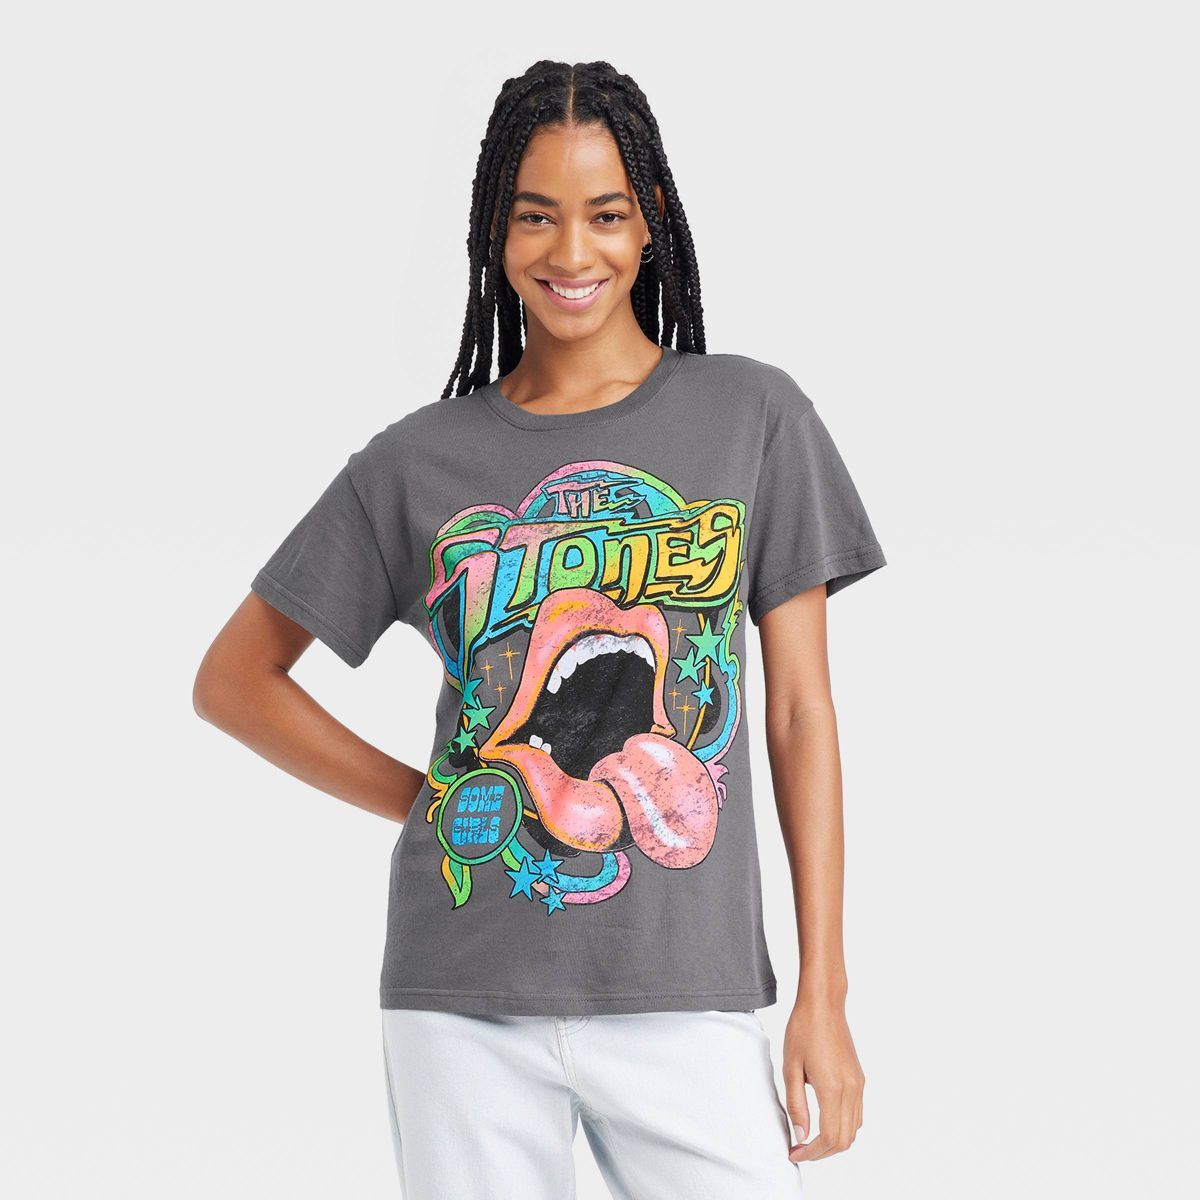 Women's The Rolling Stones Colorful Short Sleeve Graphic T-Shirt - Gray S | Target